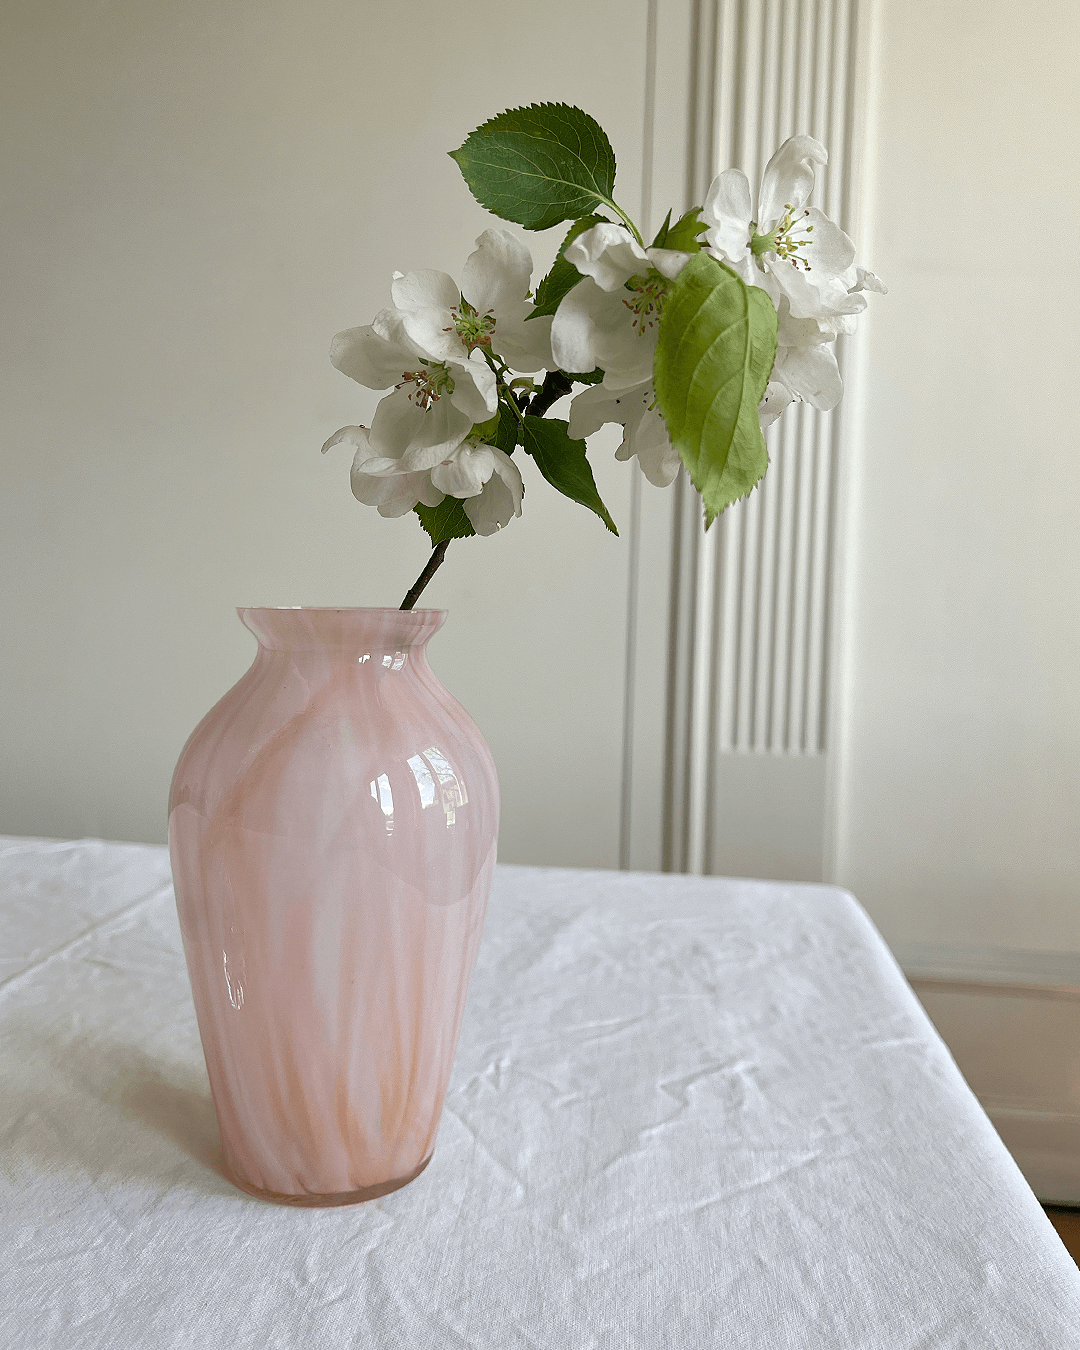 Very cute and delicate glass vase with a marbly rose coloration. 